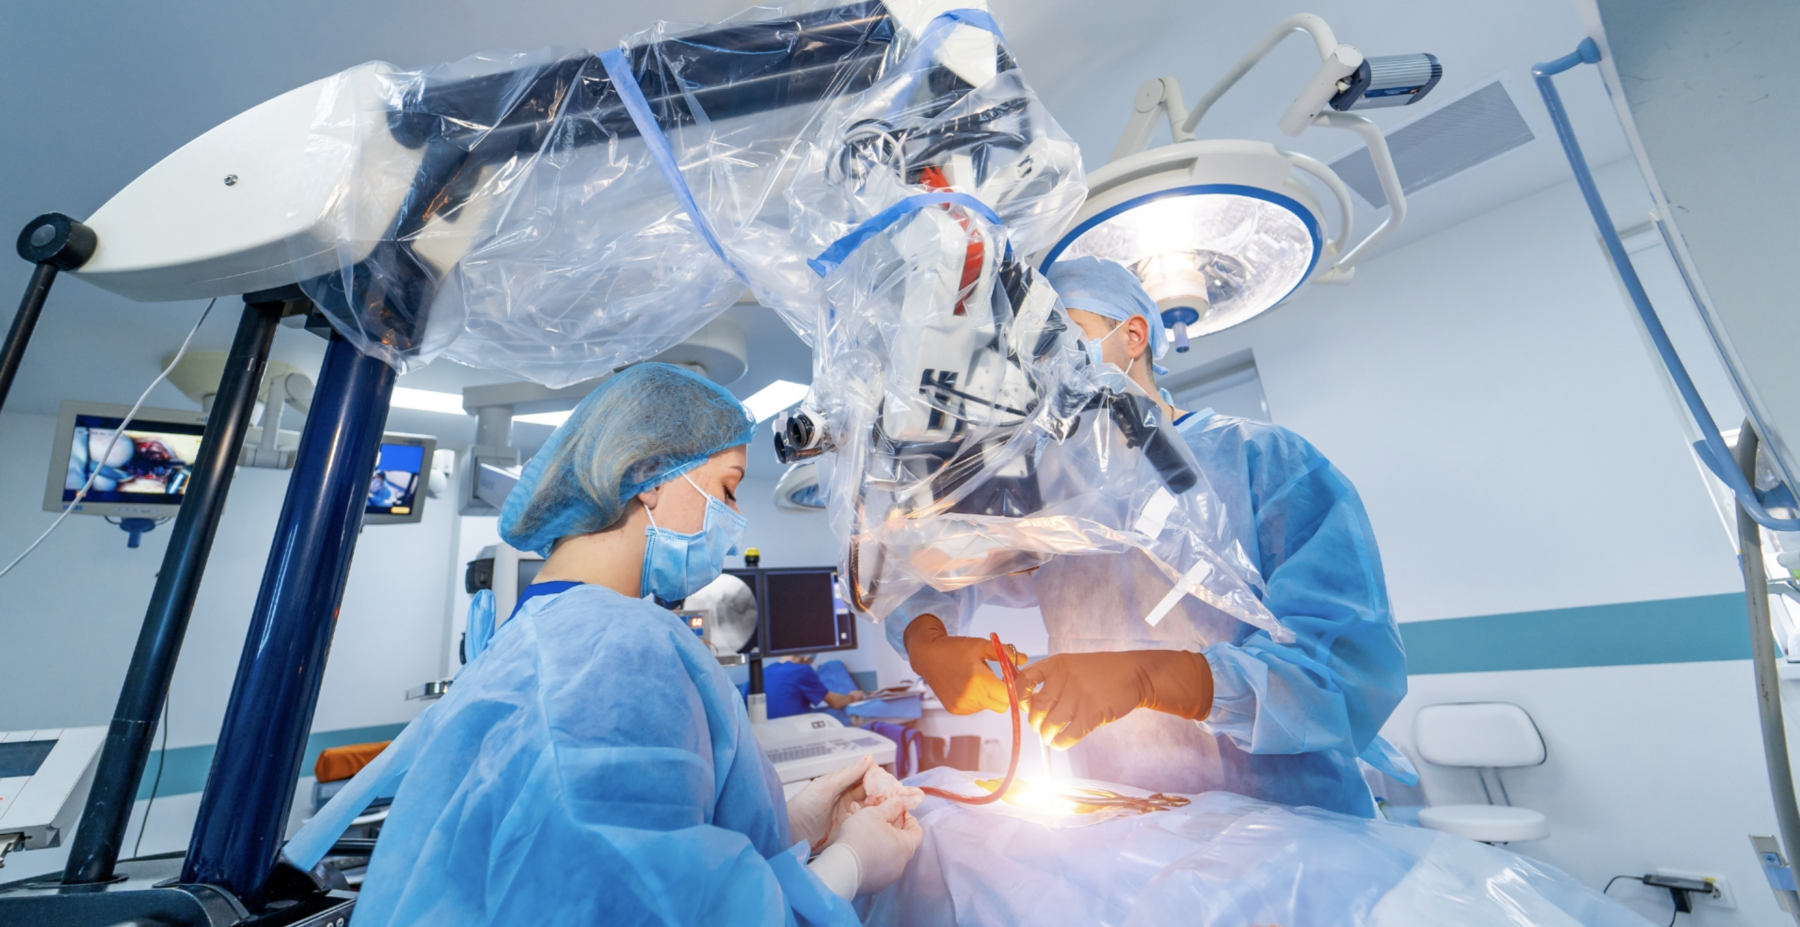 Alvica | Acupressure London | Back Pain London | Innovative Medical Device | Medical Technology Distribution and Retail | ScopeEye: Revolutionizing Robotic Surgery with Innovative Glasses for Enhanced Medical Staff Efficiency and Training Support